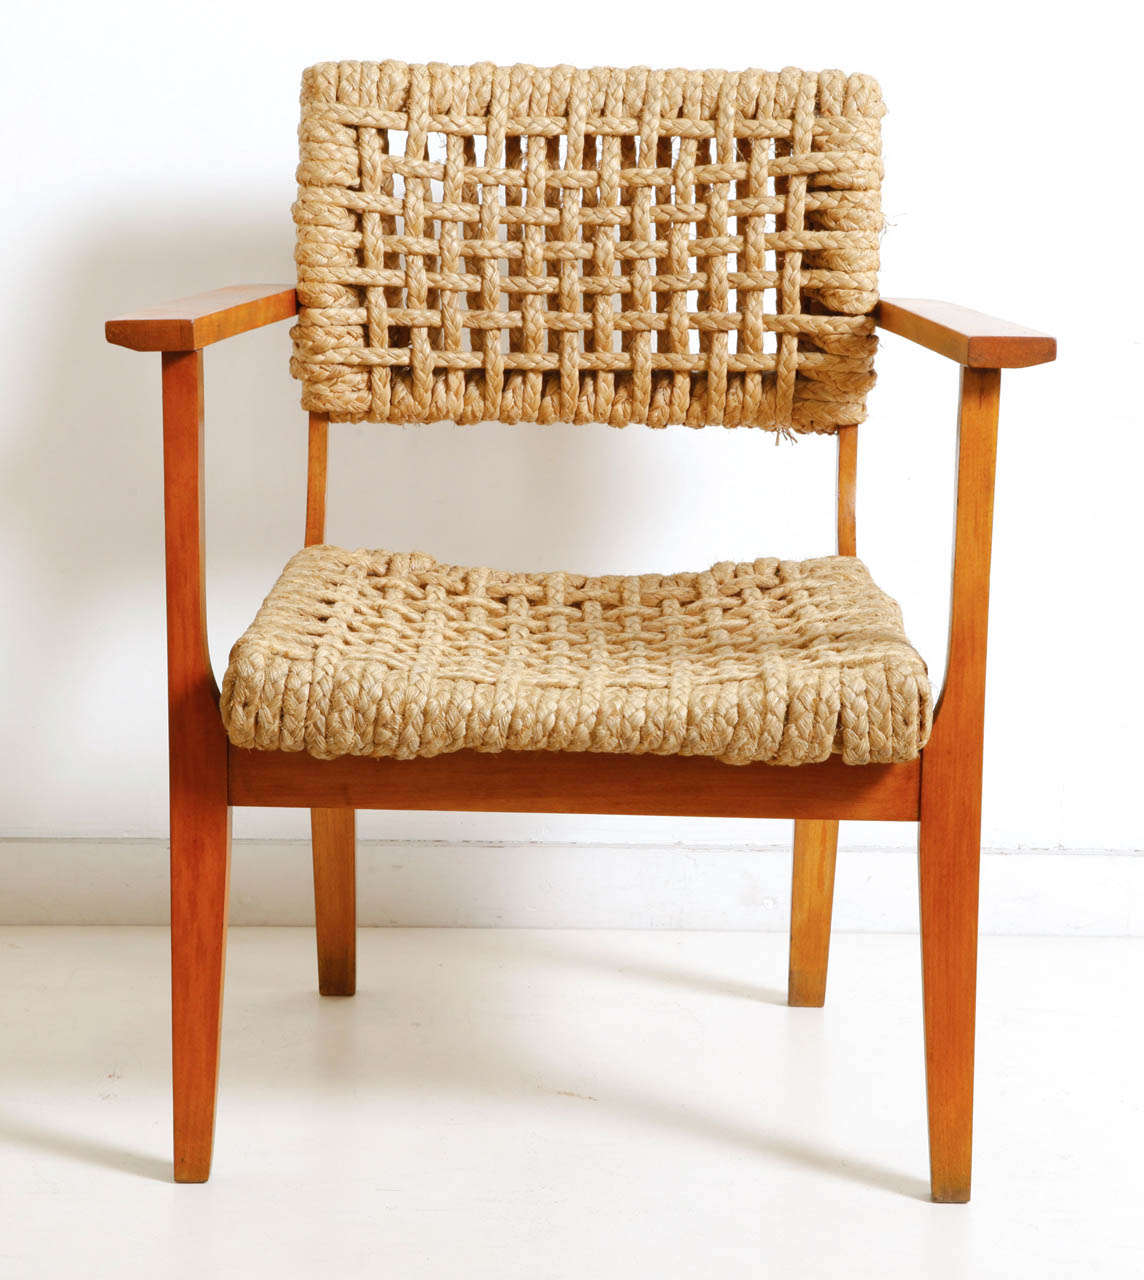 Rare low armchairs by Audoux-Minet in oak with braided rope seat and back.
Edited by Vibo, France circa 1950.